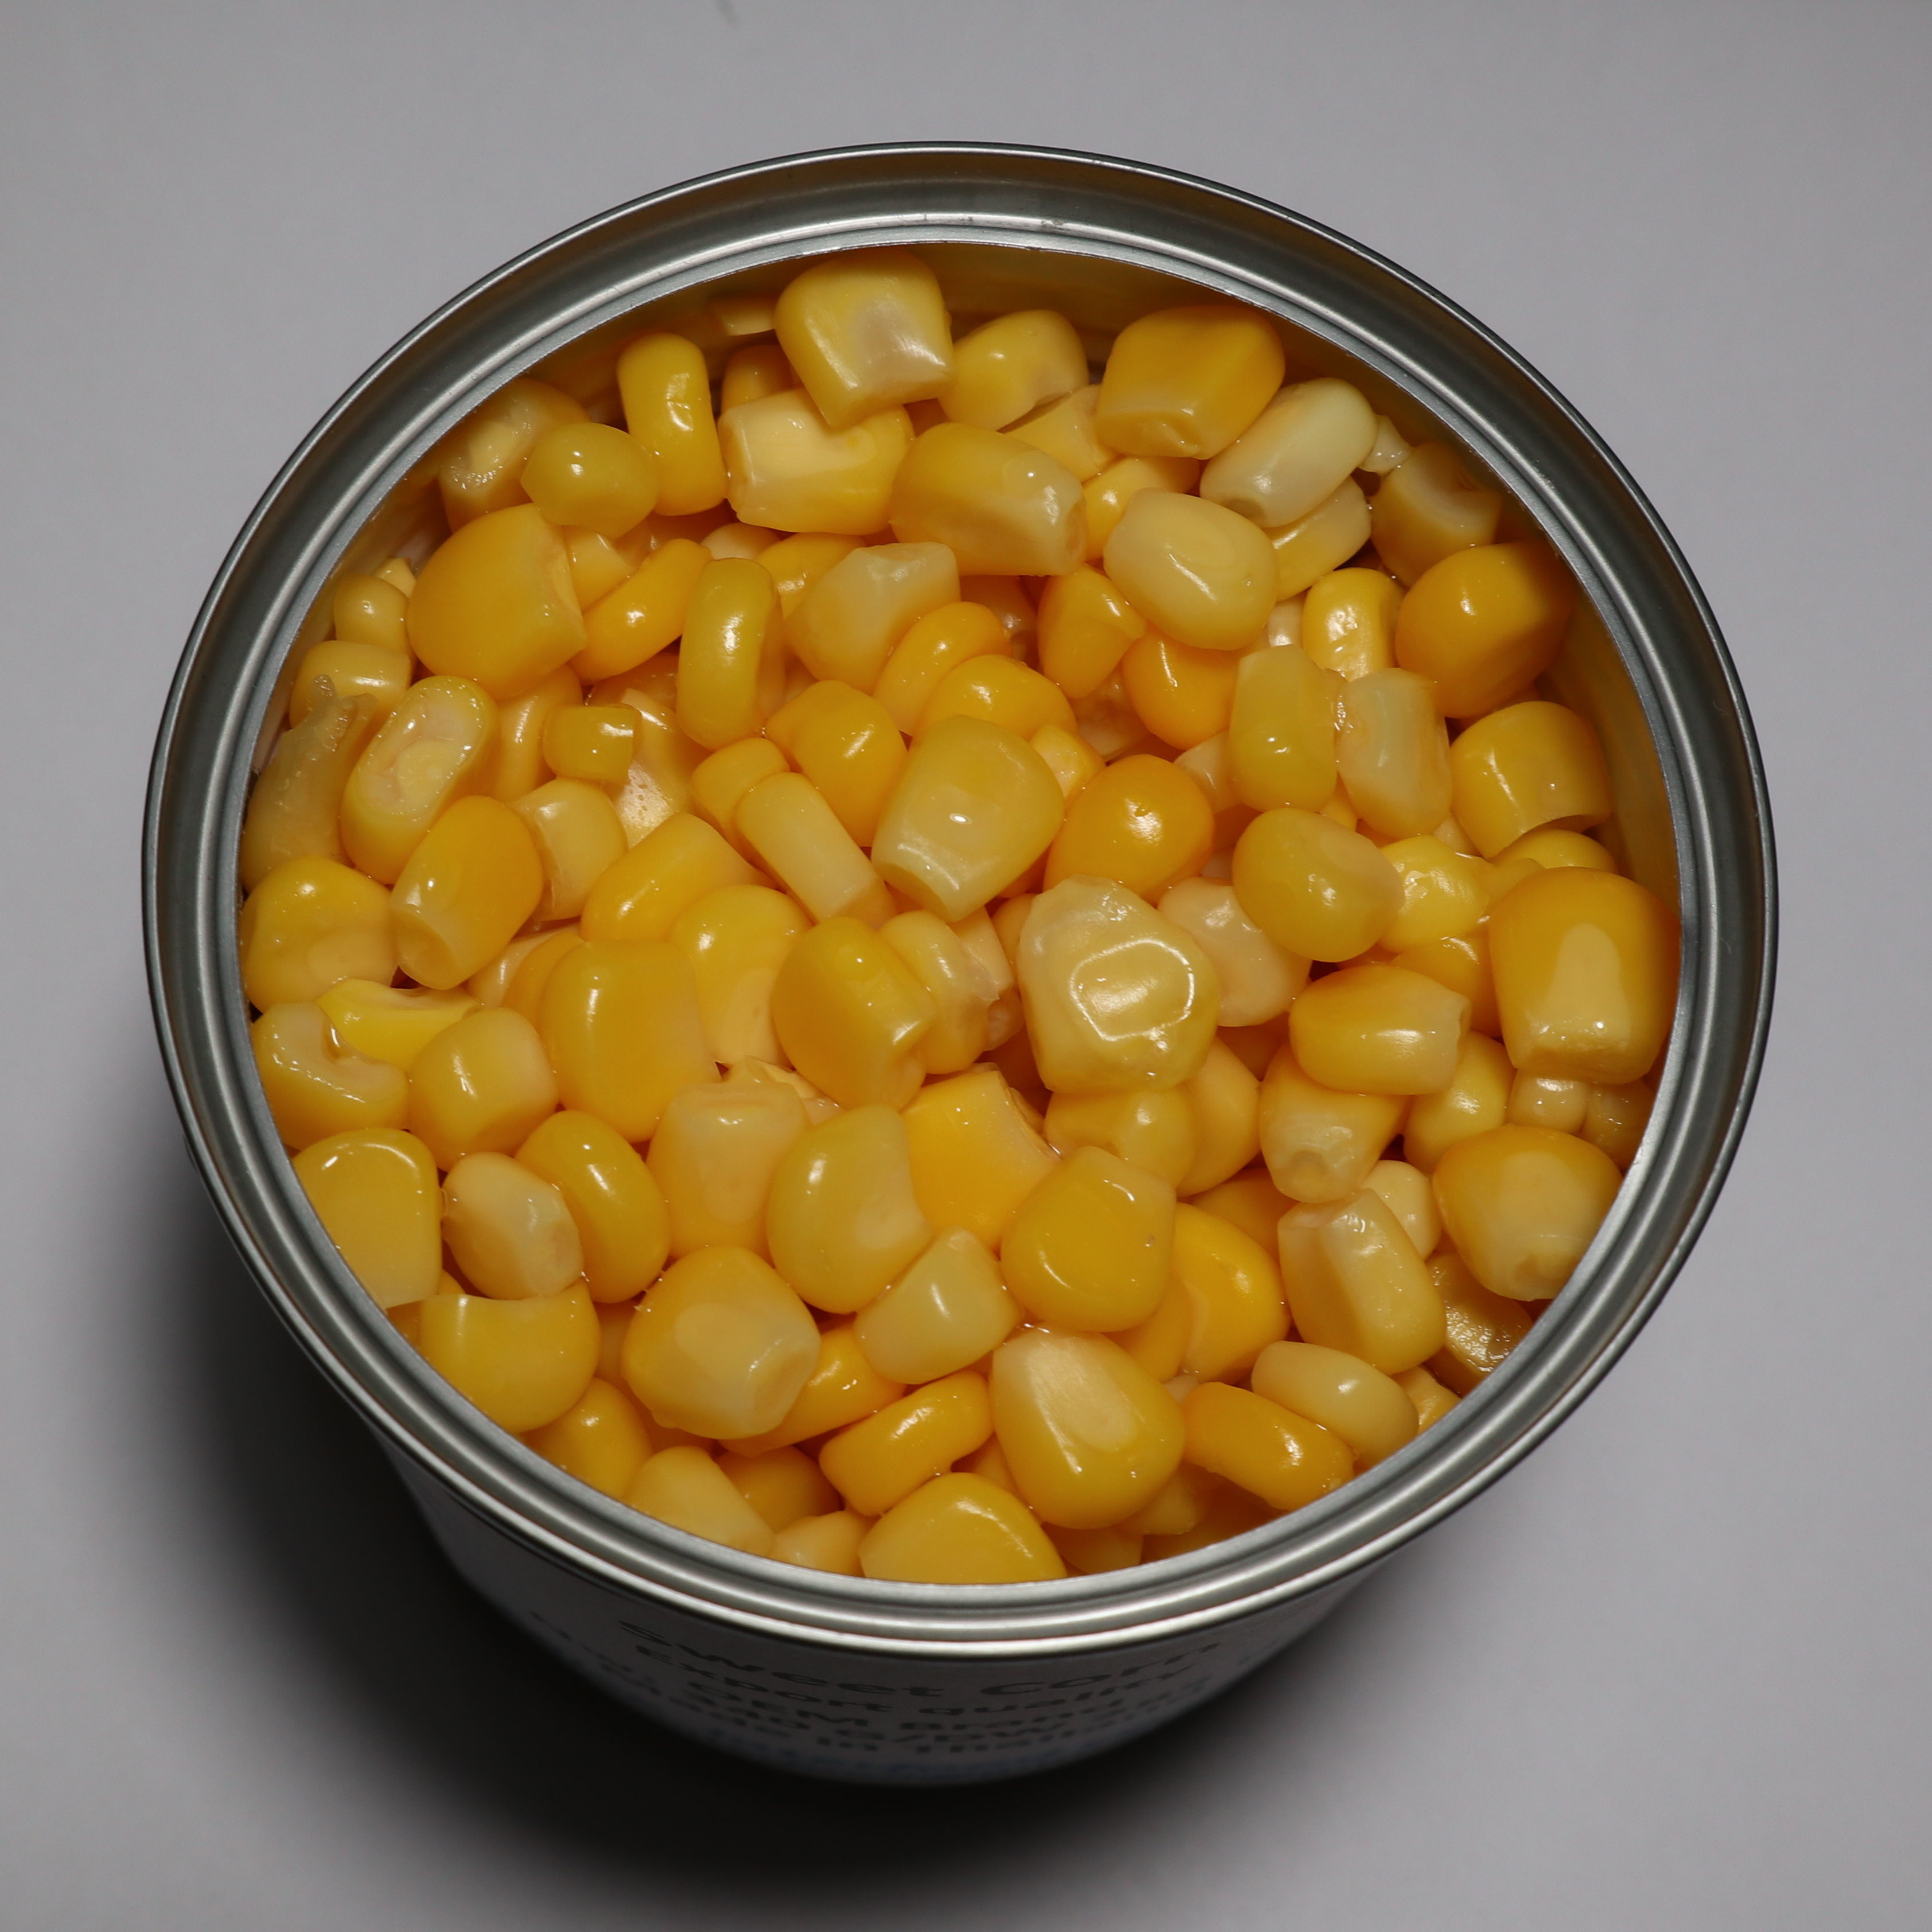 Ingredients CORN, WATER, SEA SALT.Great taste and easy open tab tops of cans.Canned Cream Style Corn